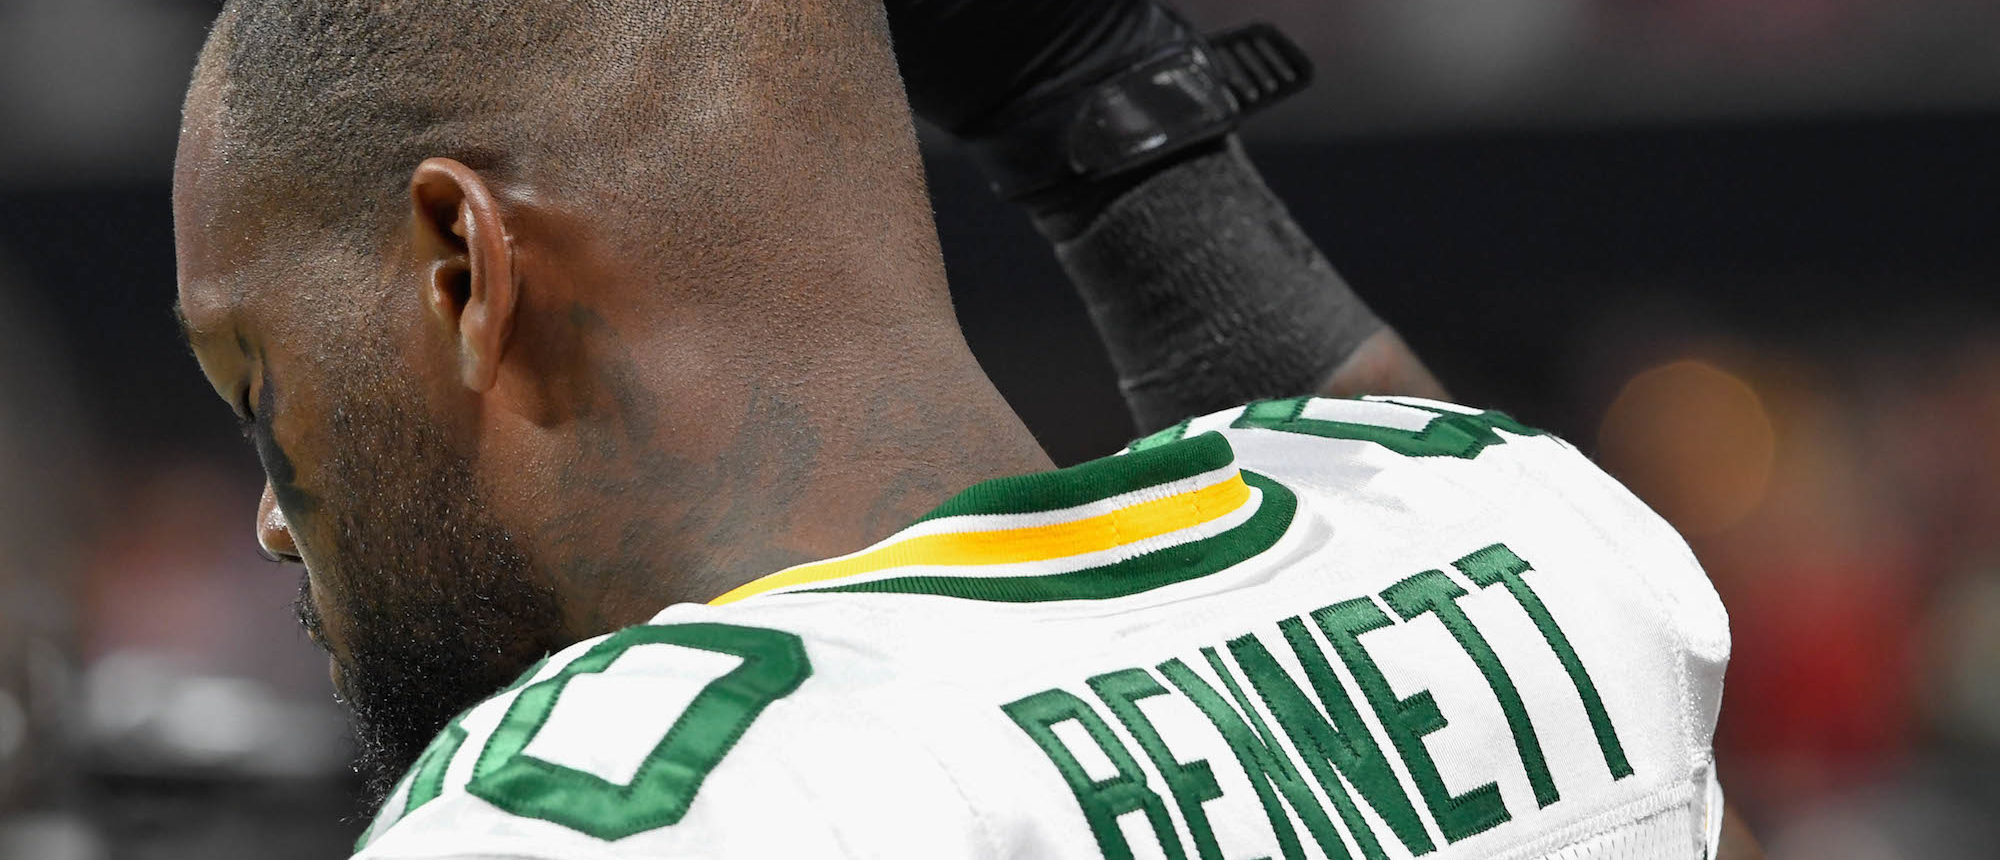 Green Bay Packers tight end Martellus Bennett shown during the National Anthem before the game against the Atlanta Falcons at Mercedes-Benz Stadium in Atlanta, Sept. 17, 2017. Photo: Dale Zanine-USA TODAY Sports